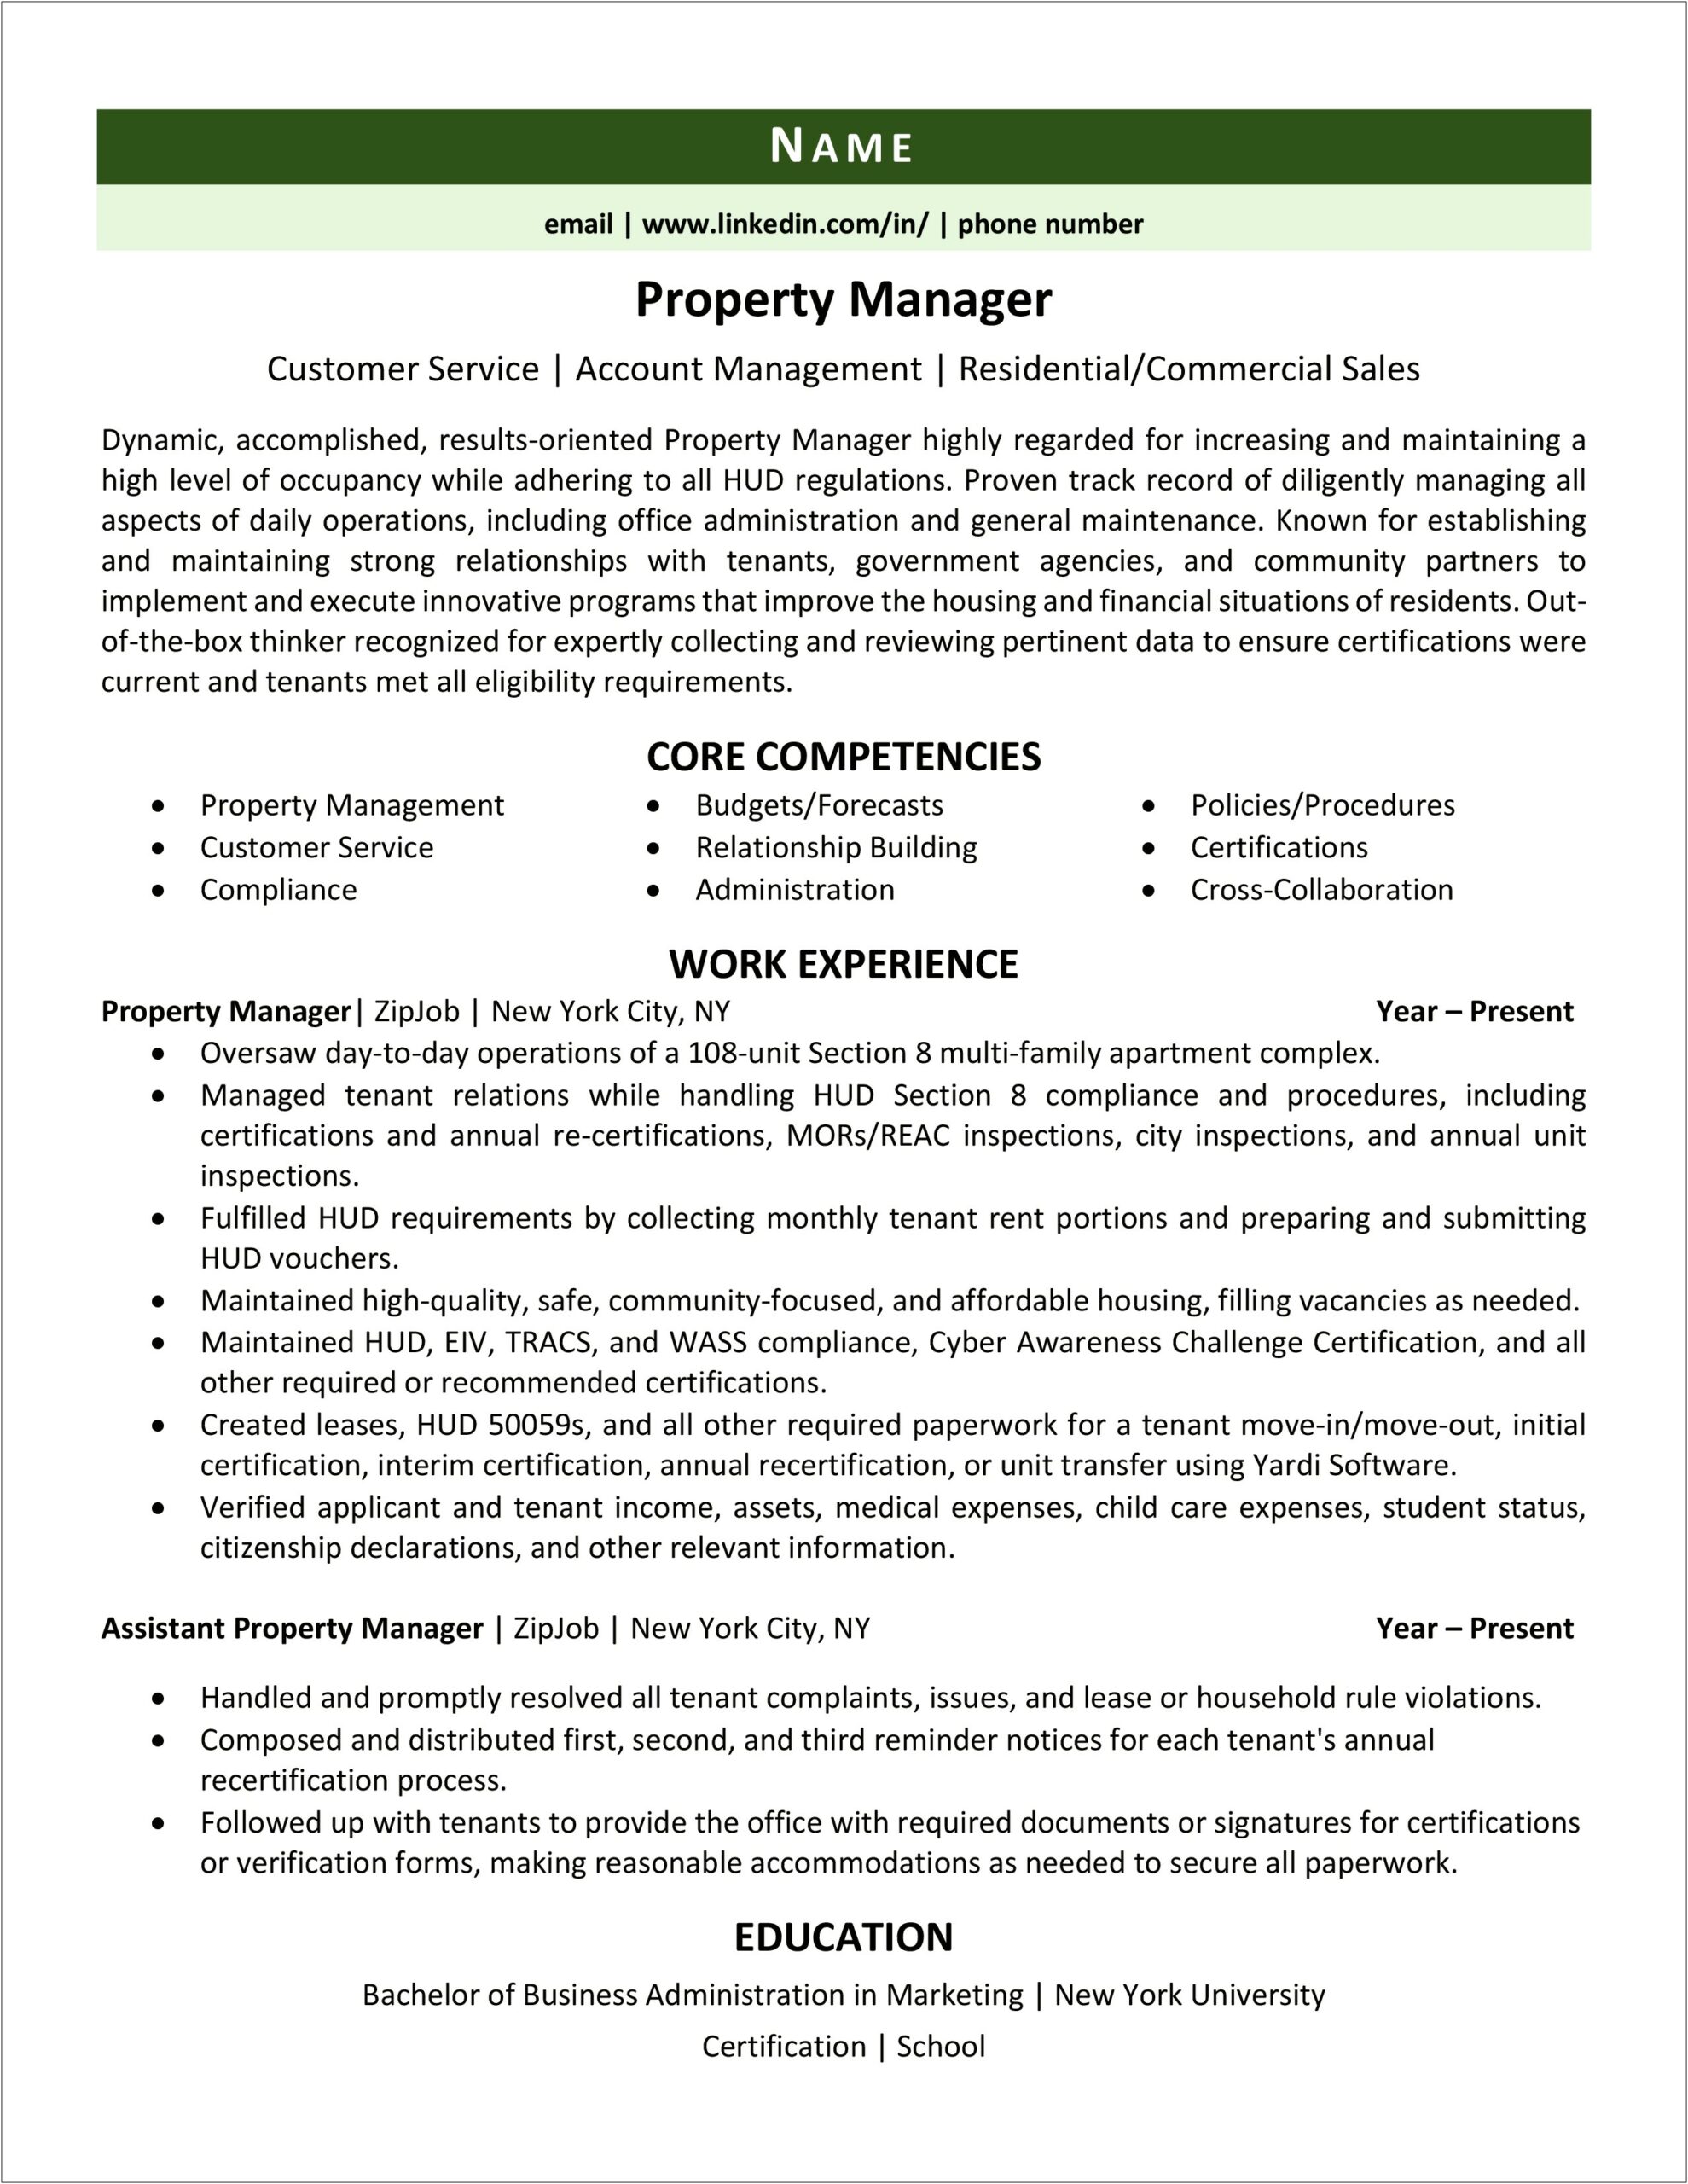 Assistant Property Manager Resume No Experience